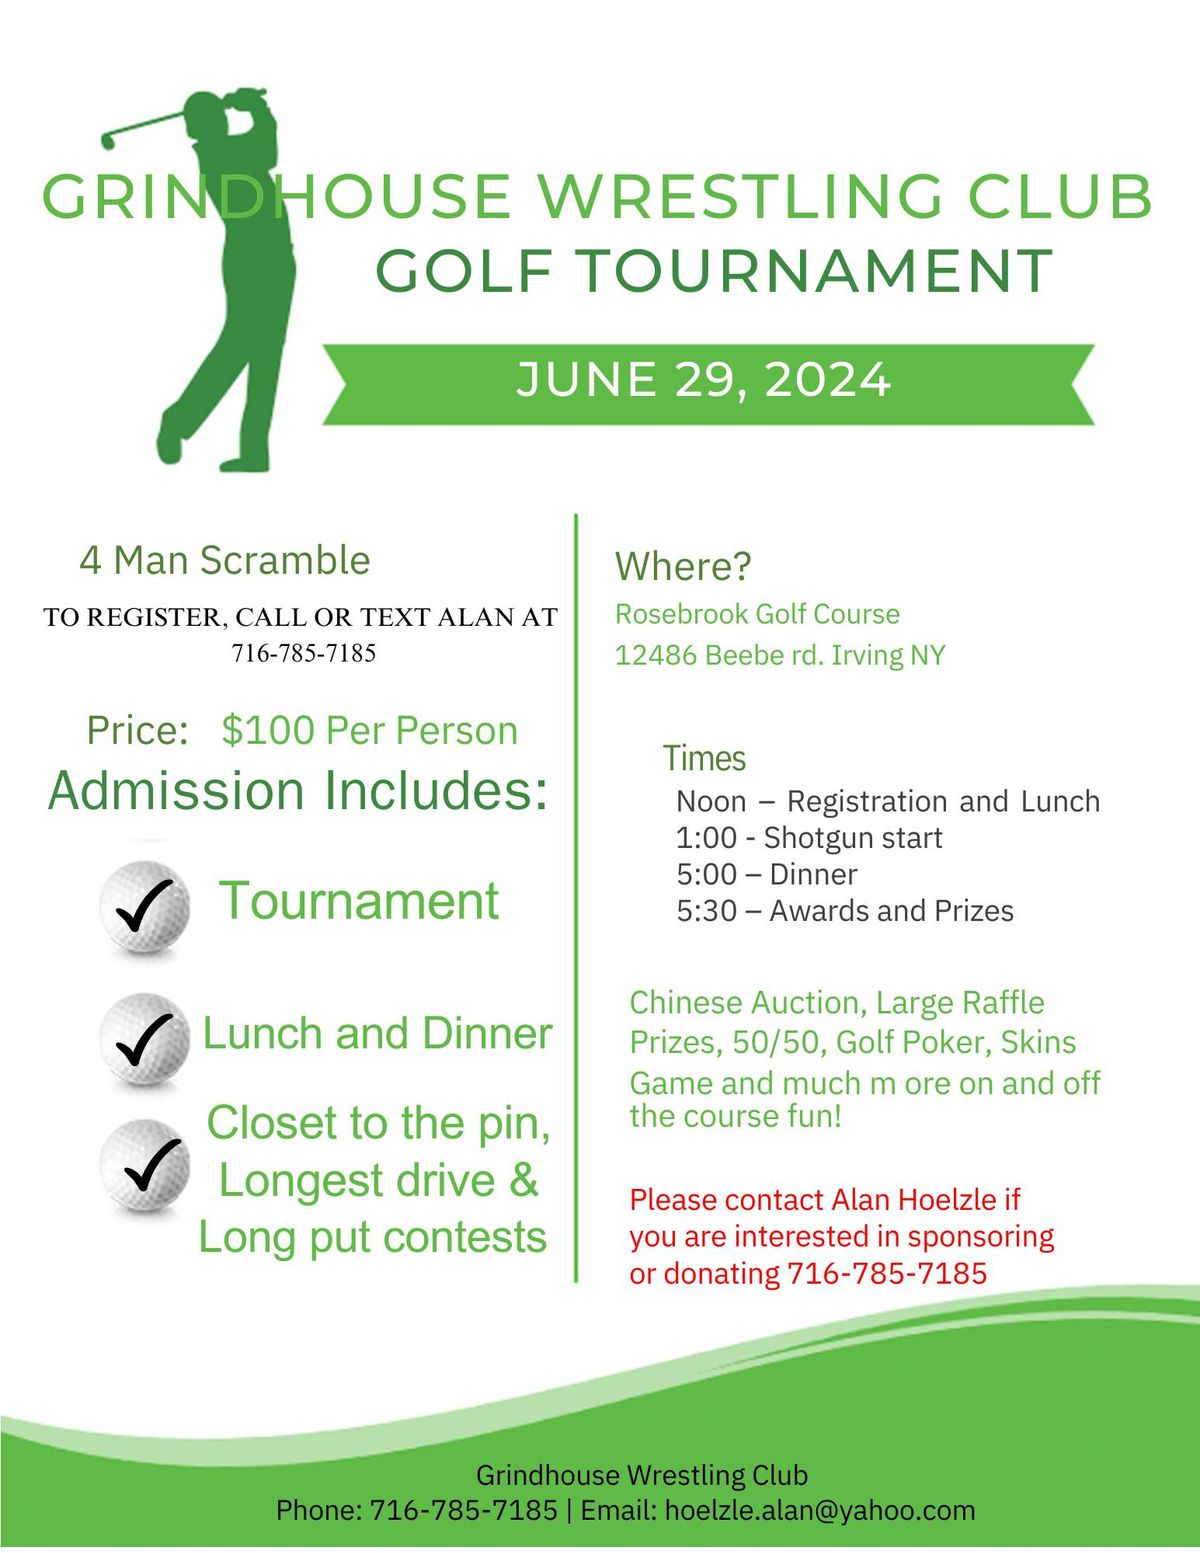 Grindhouse Golf Tournment